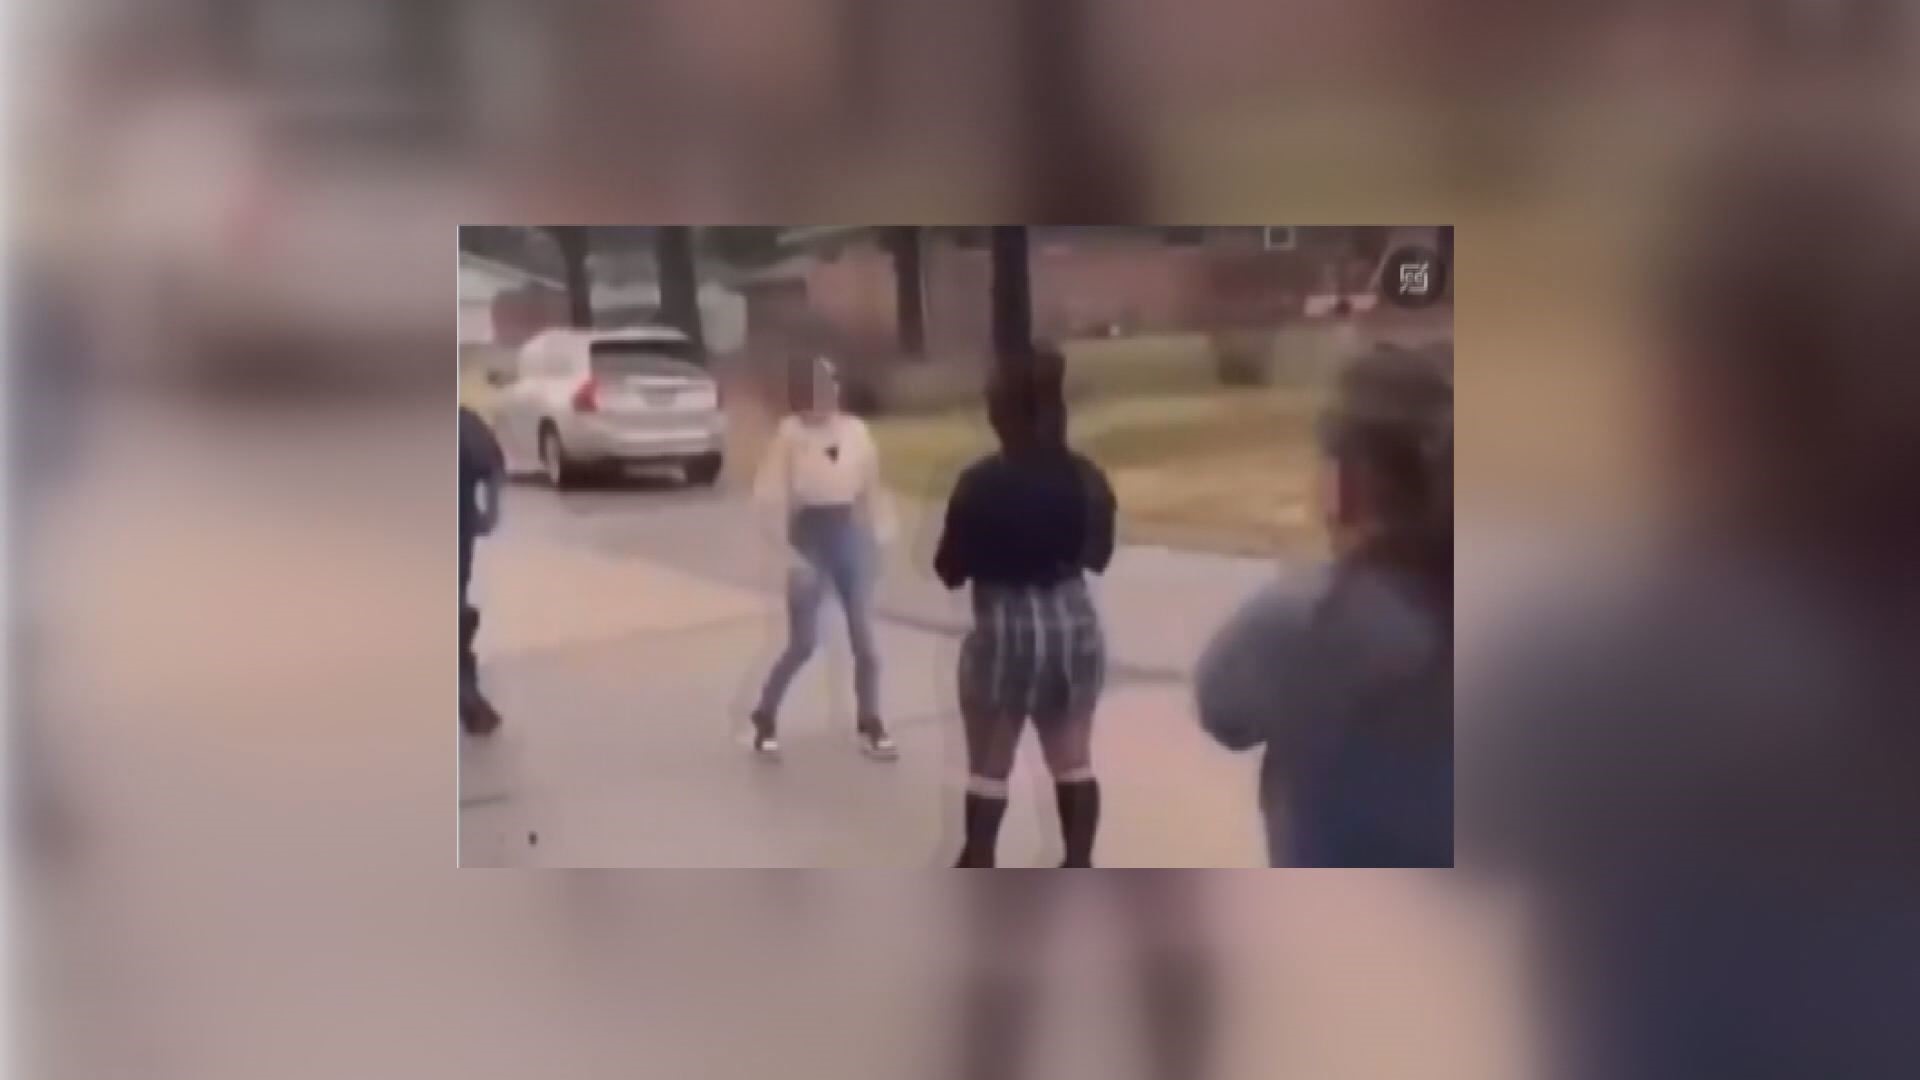 A judge ruled a 15-year-old girl will remain in the juvenile court system. This stems from a viral video showing a high school fight near Hazelwood East.